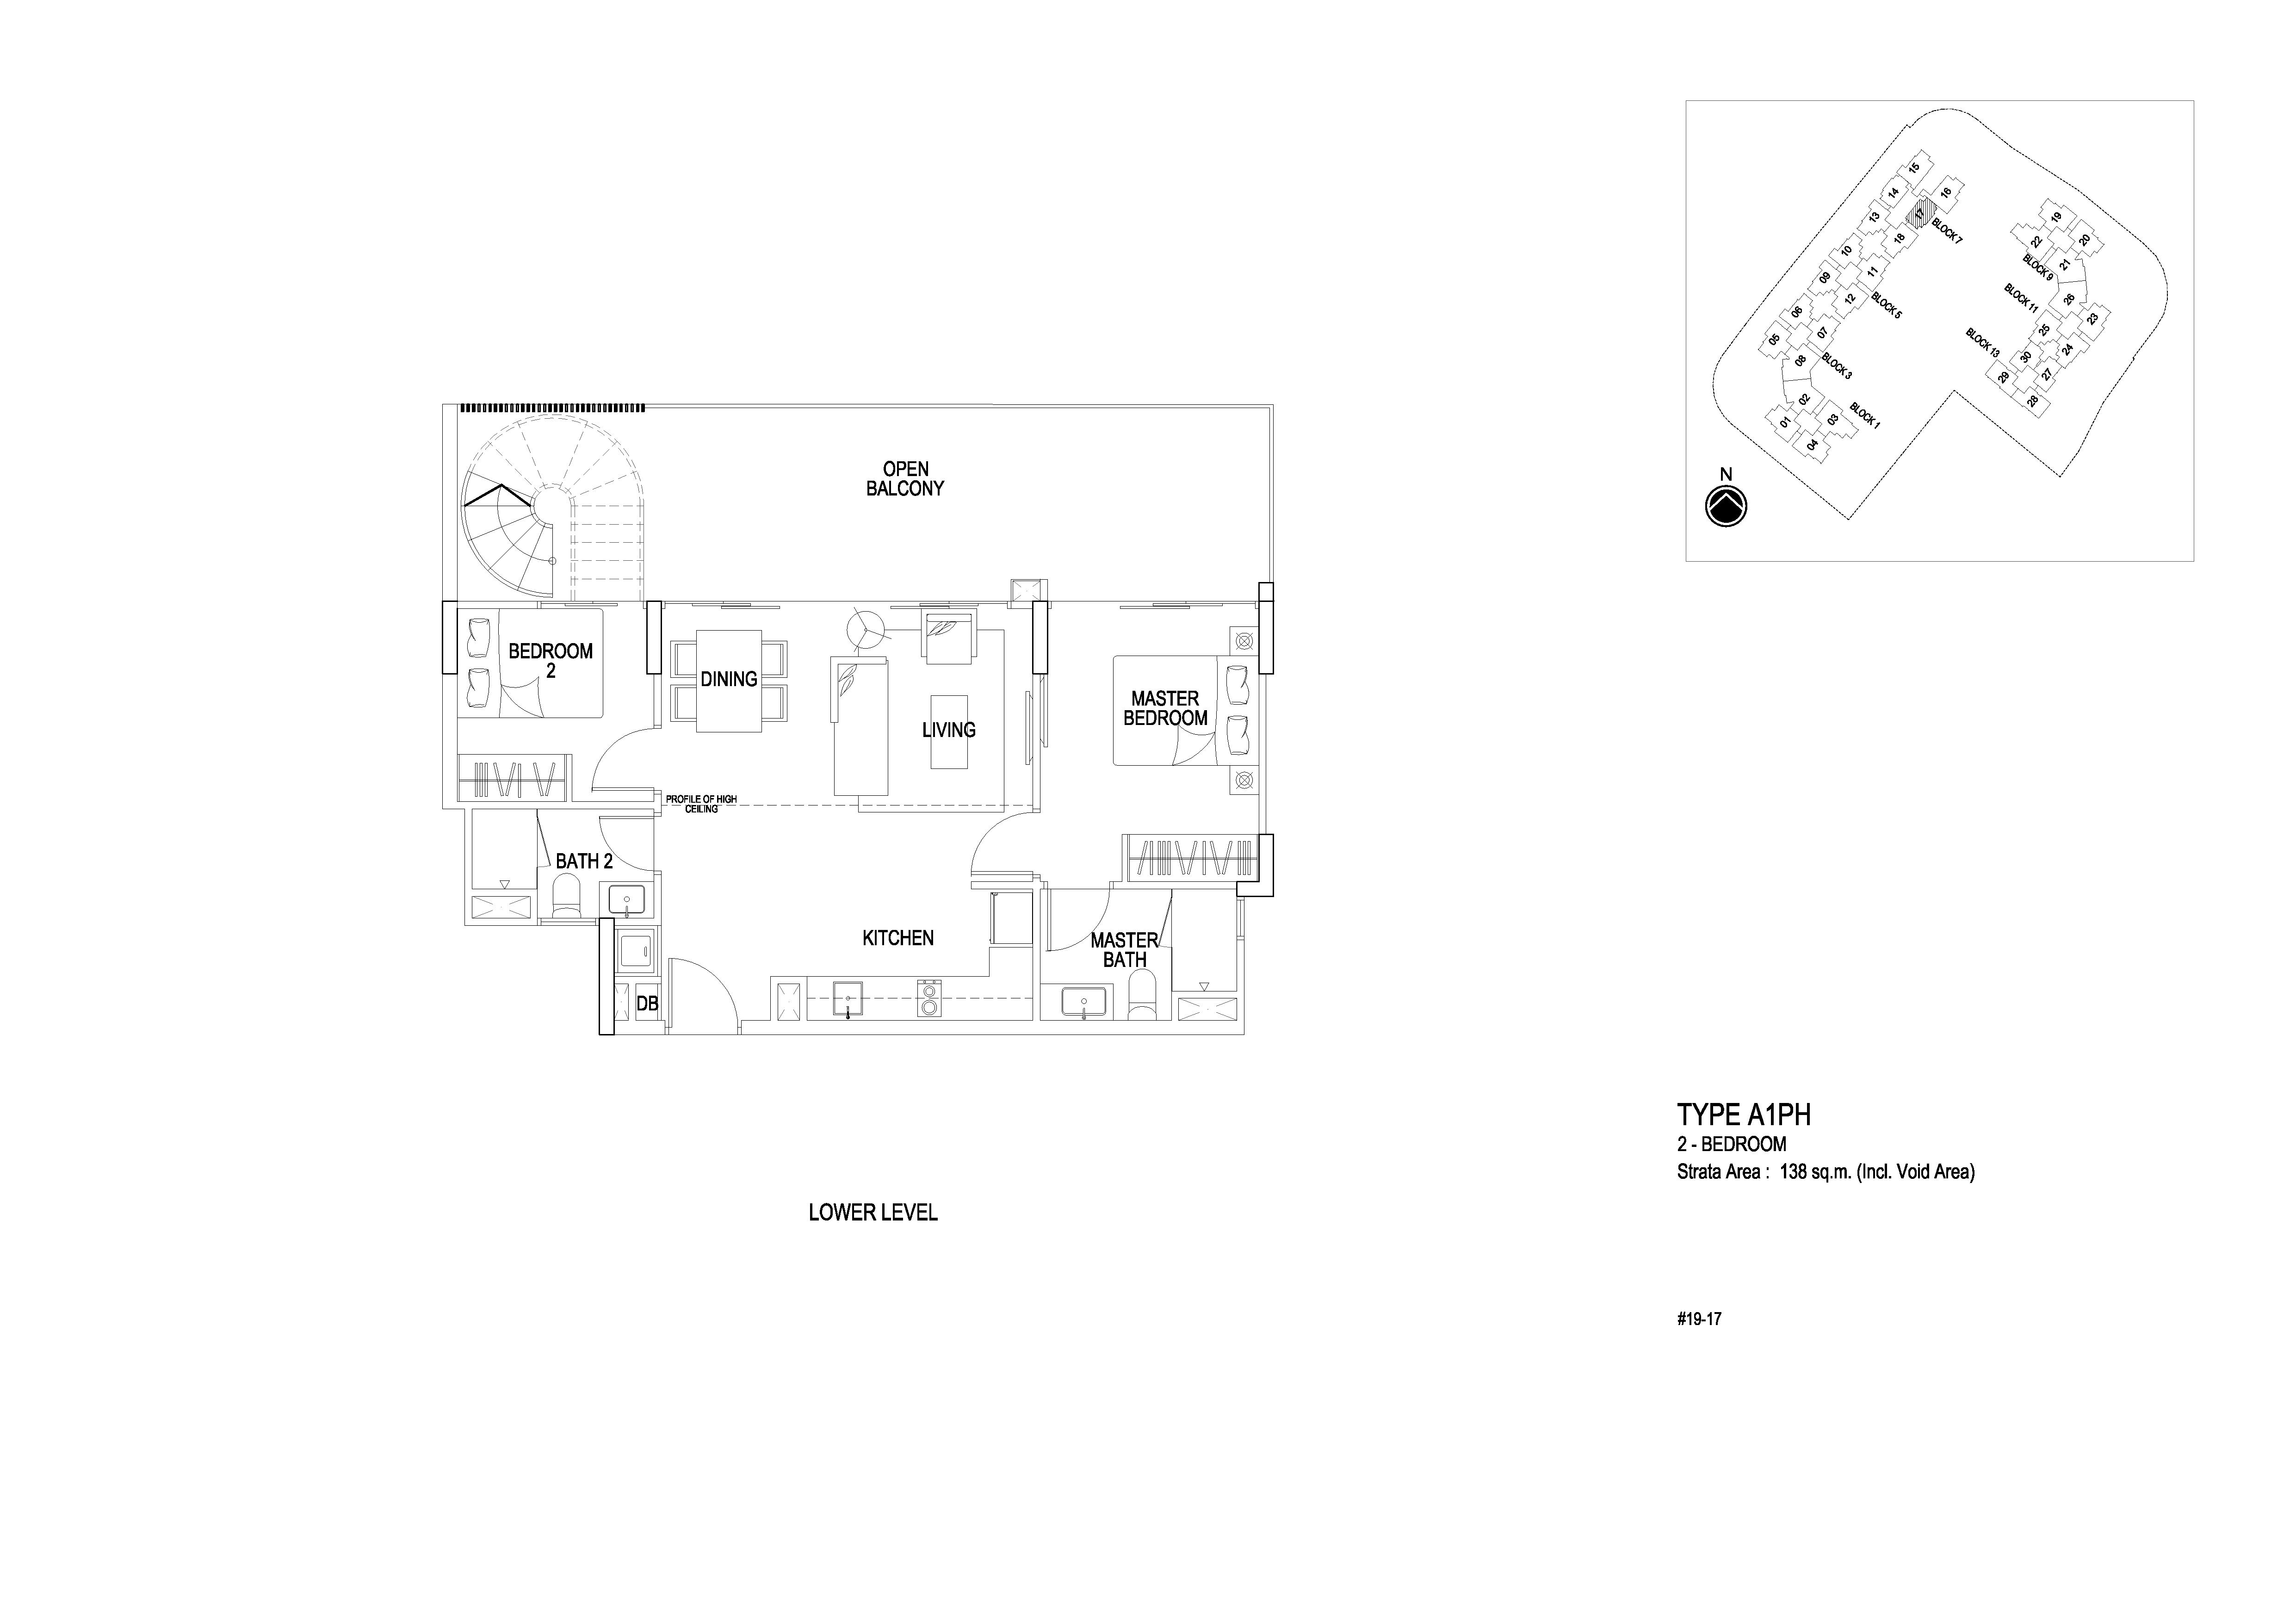 Flo Residence 2 Bedroom Penthouse Lower Level Floor Plans Type A1PH